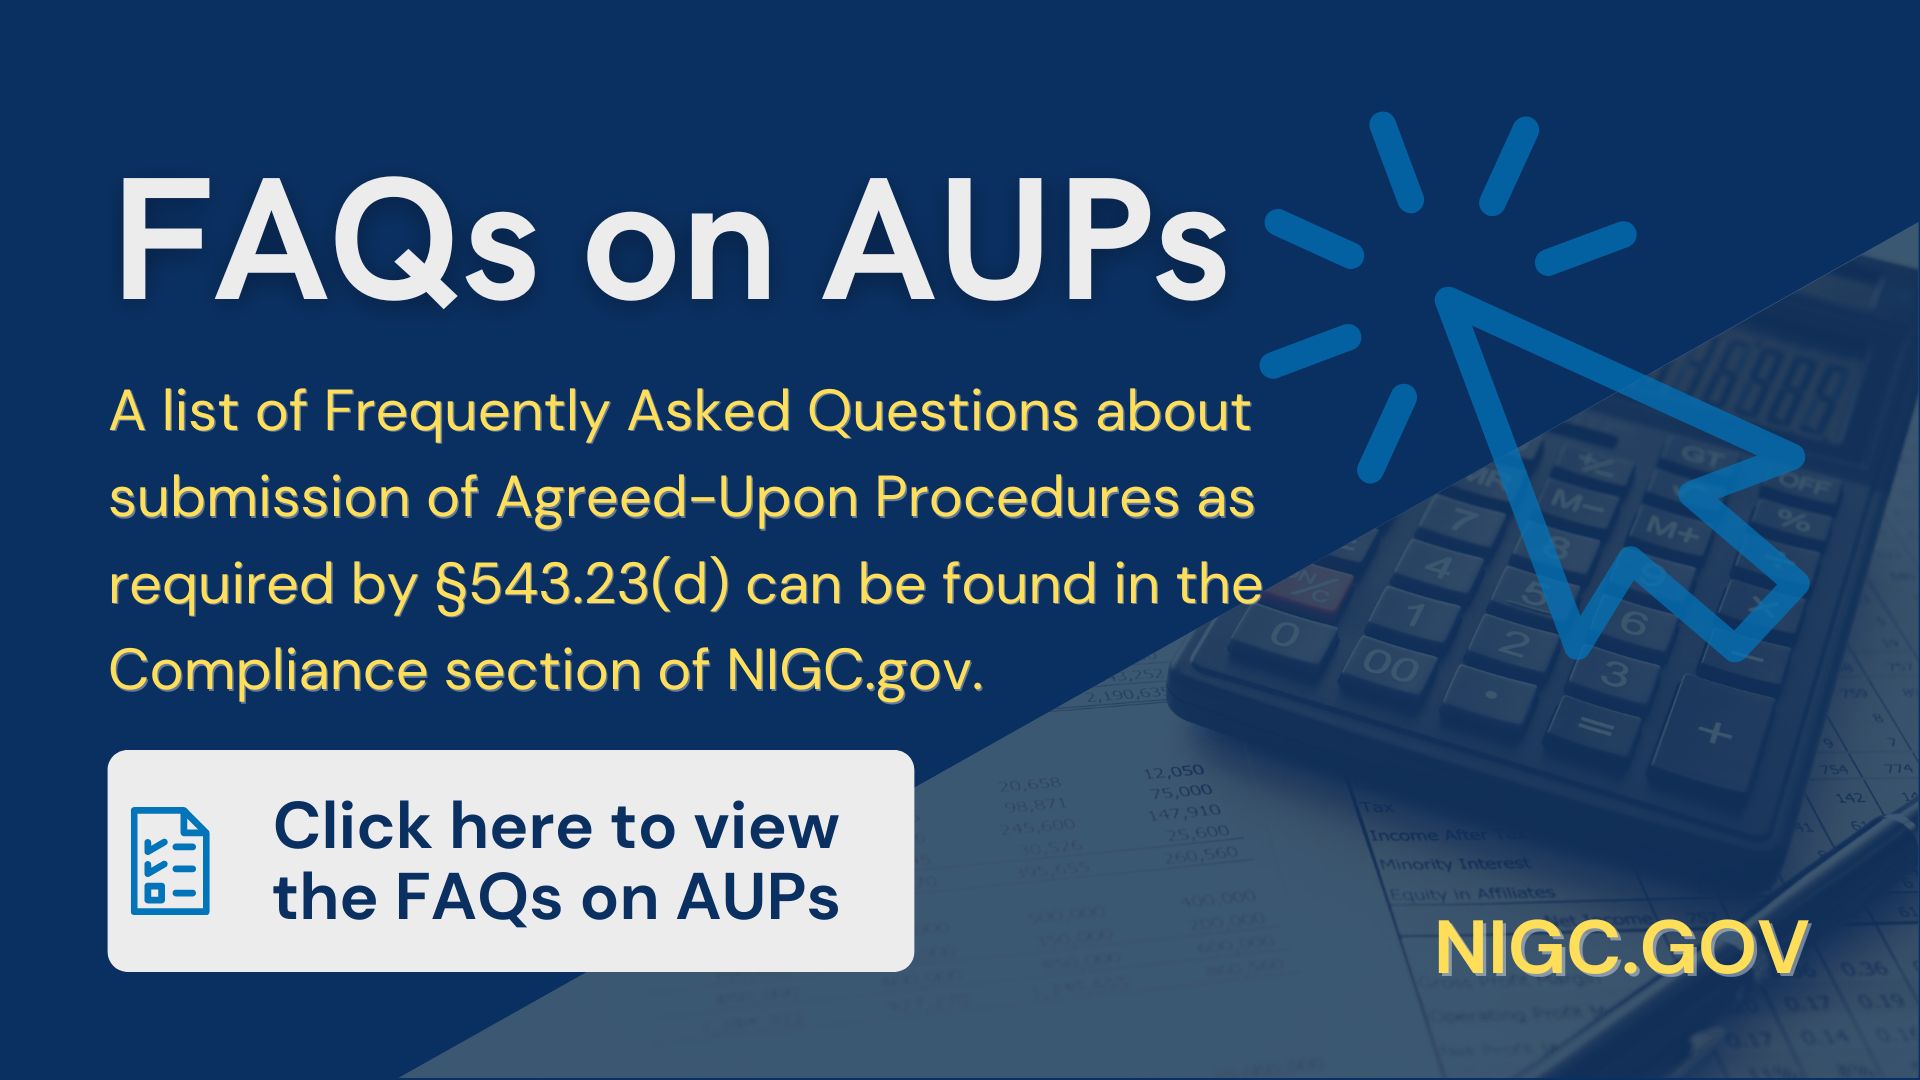 FAQs on AUPs